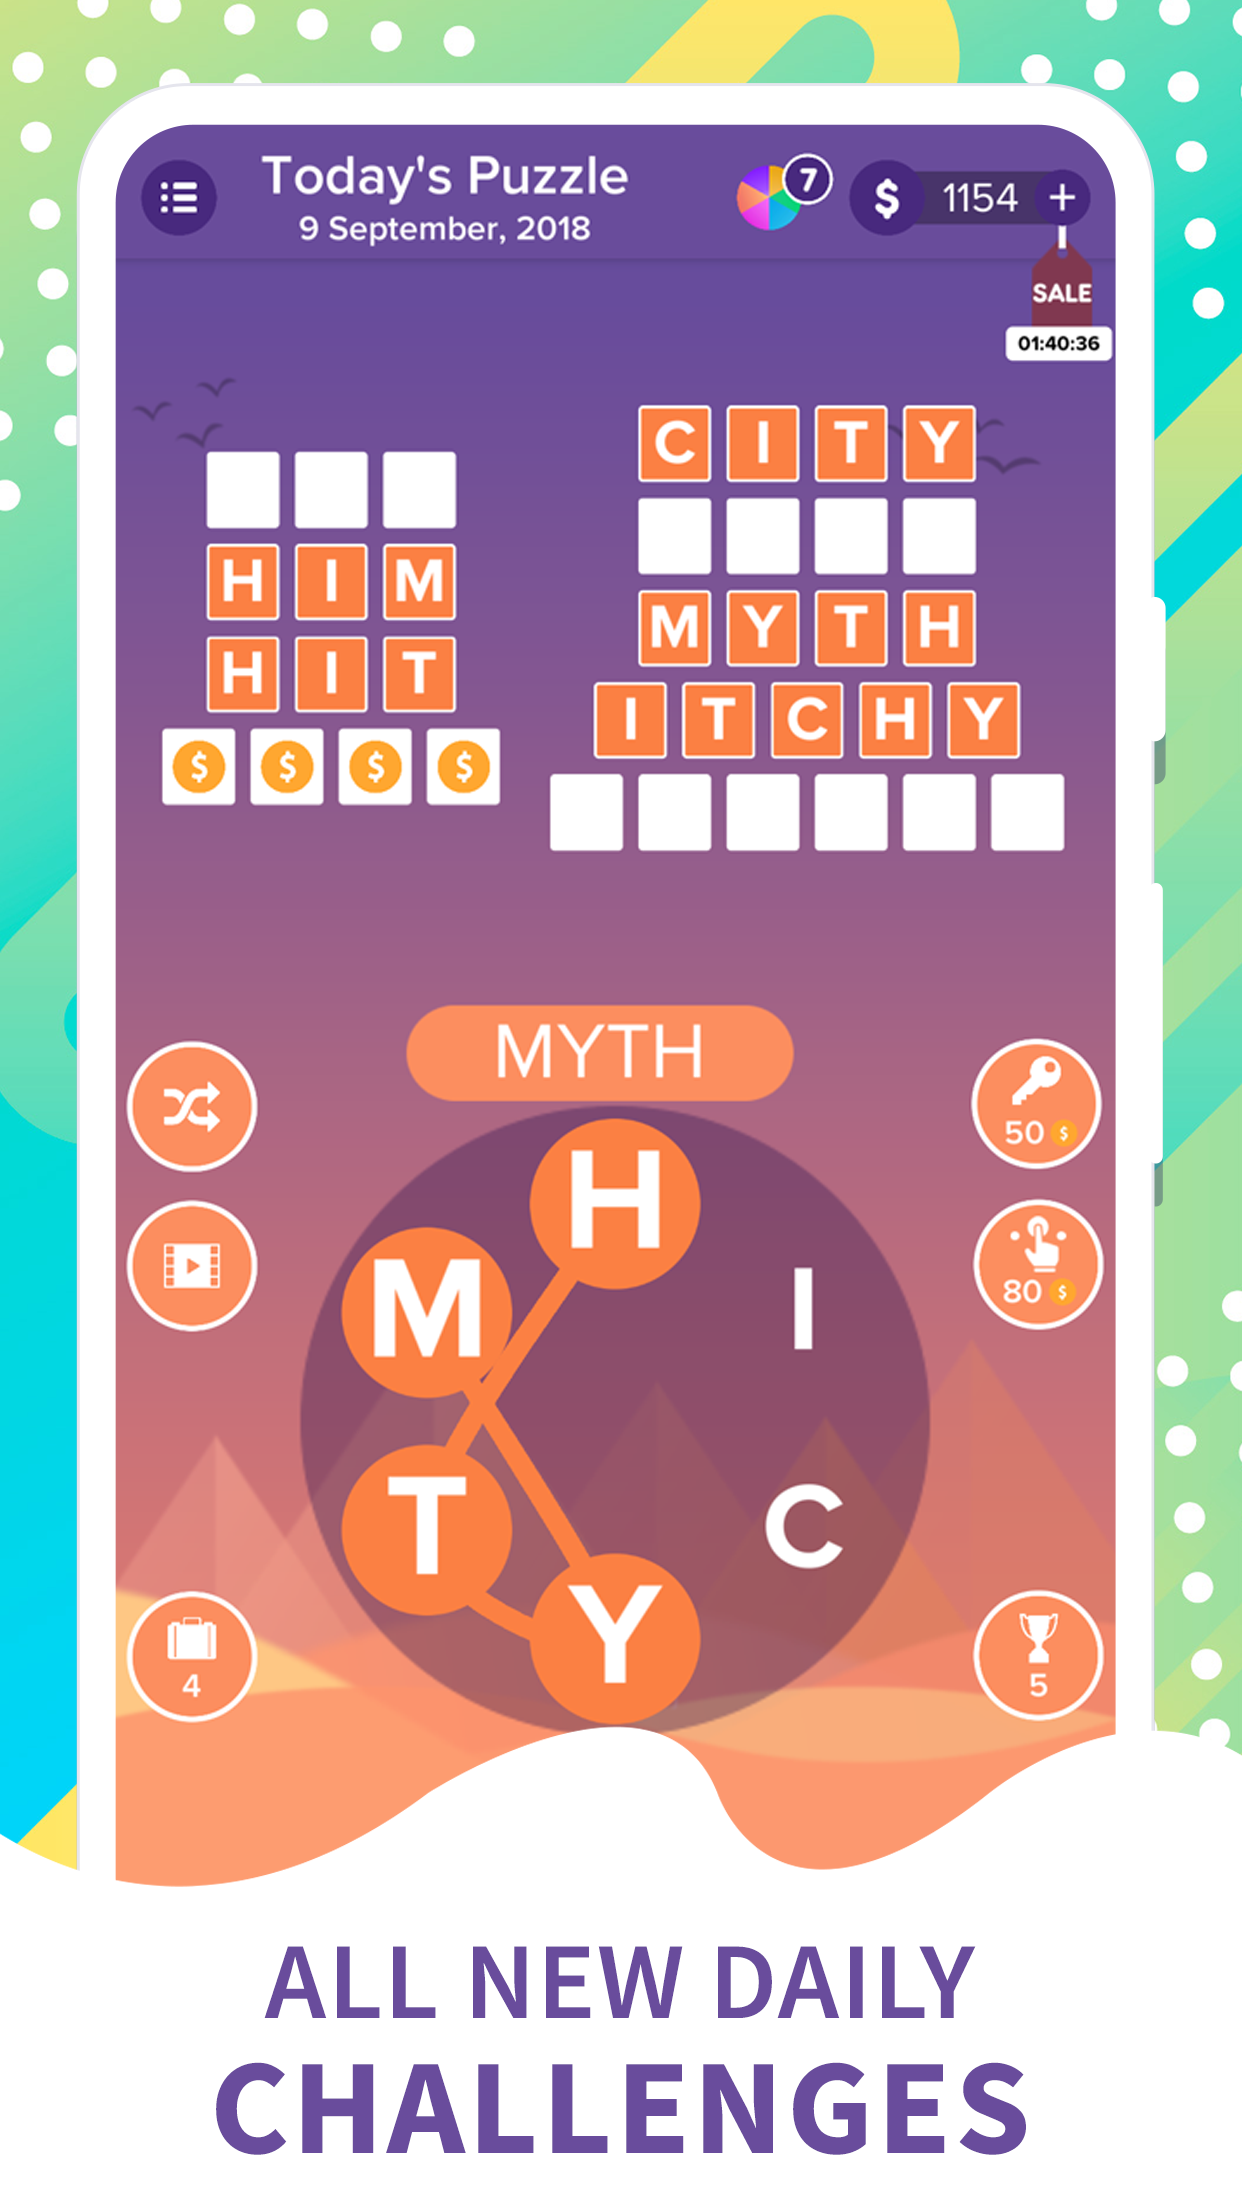 Screenshot of Word Champ - Word Puzzle Game